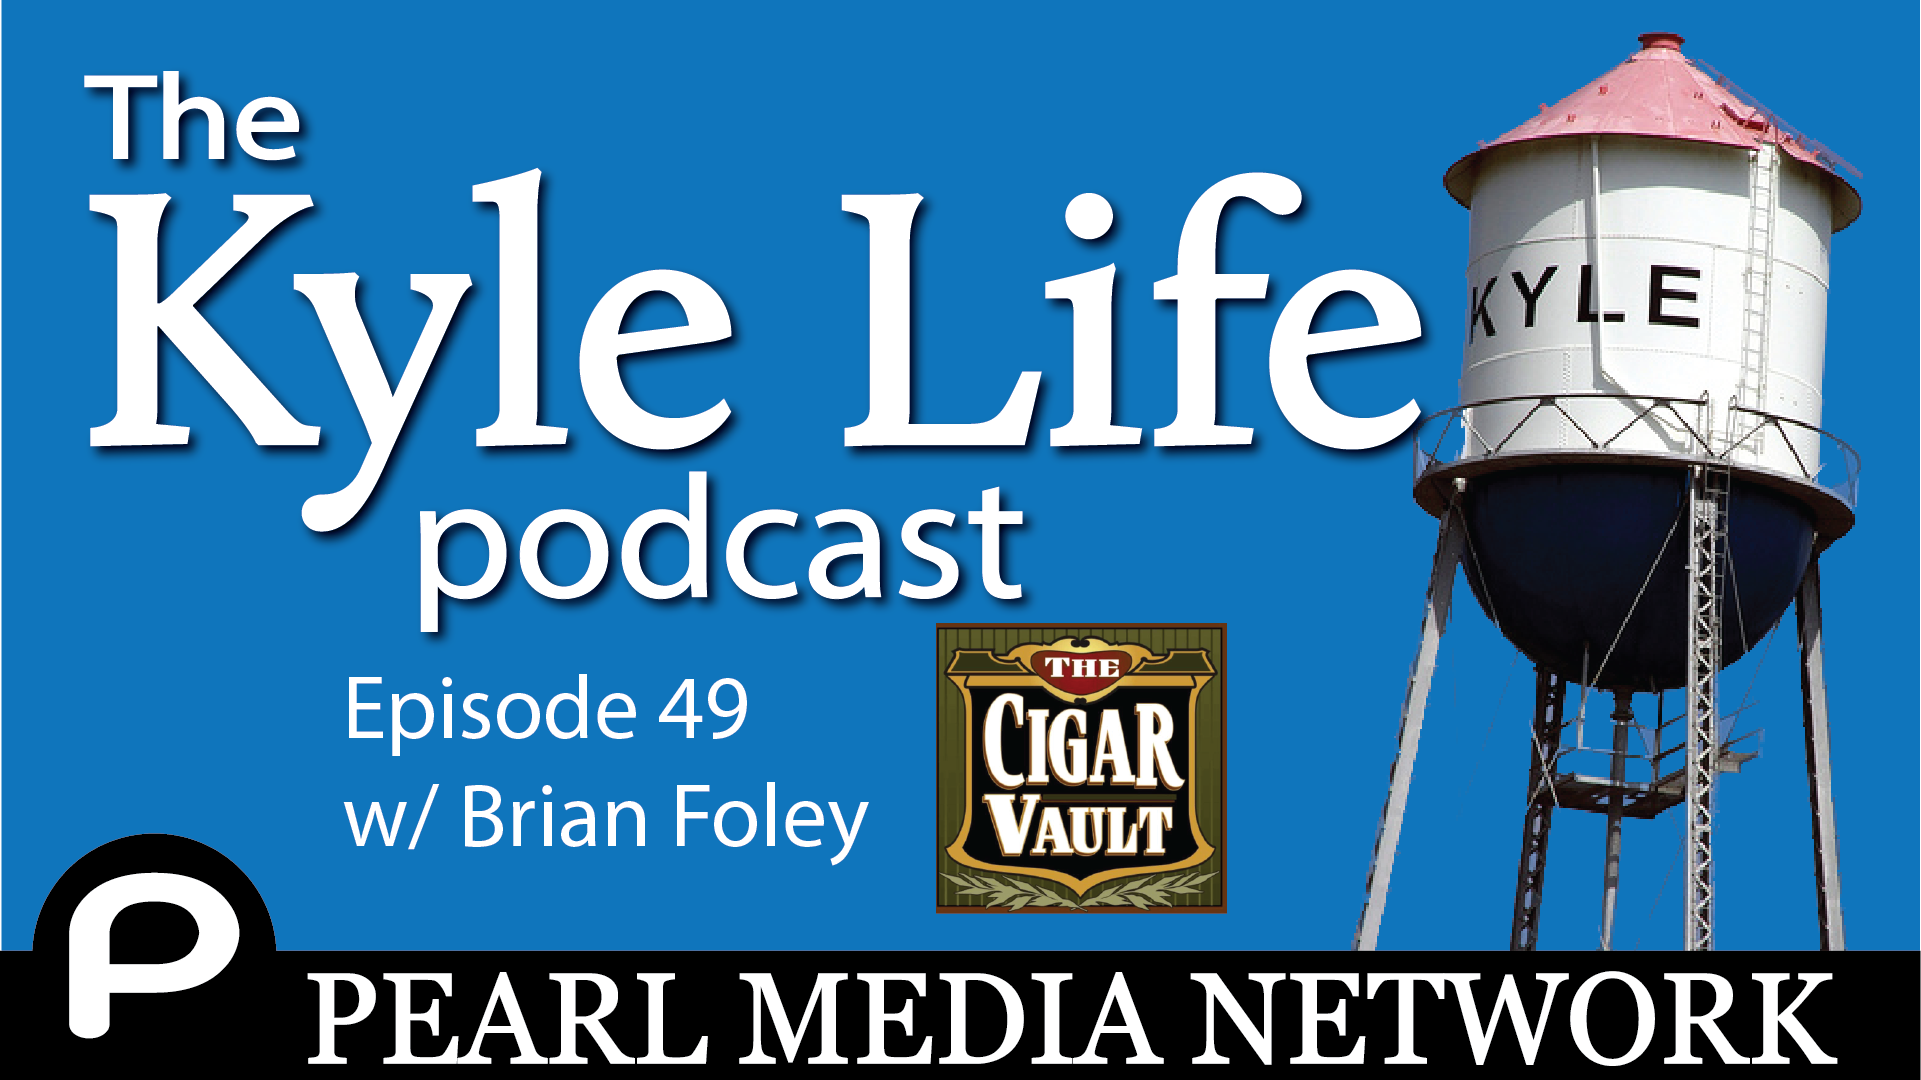 The Kyle Life Podcast – Episode 49 w/ Brian Foley of the Cigar Vault in Buda